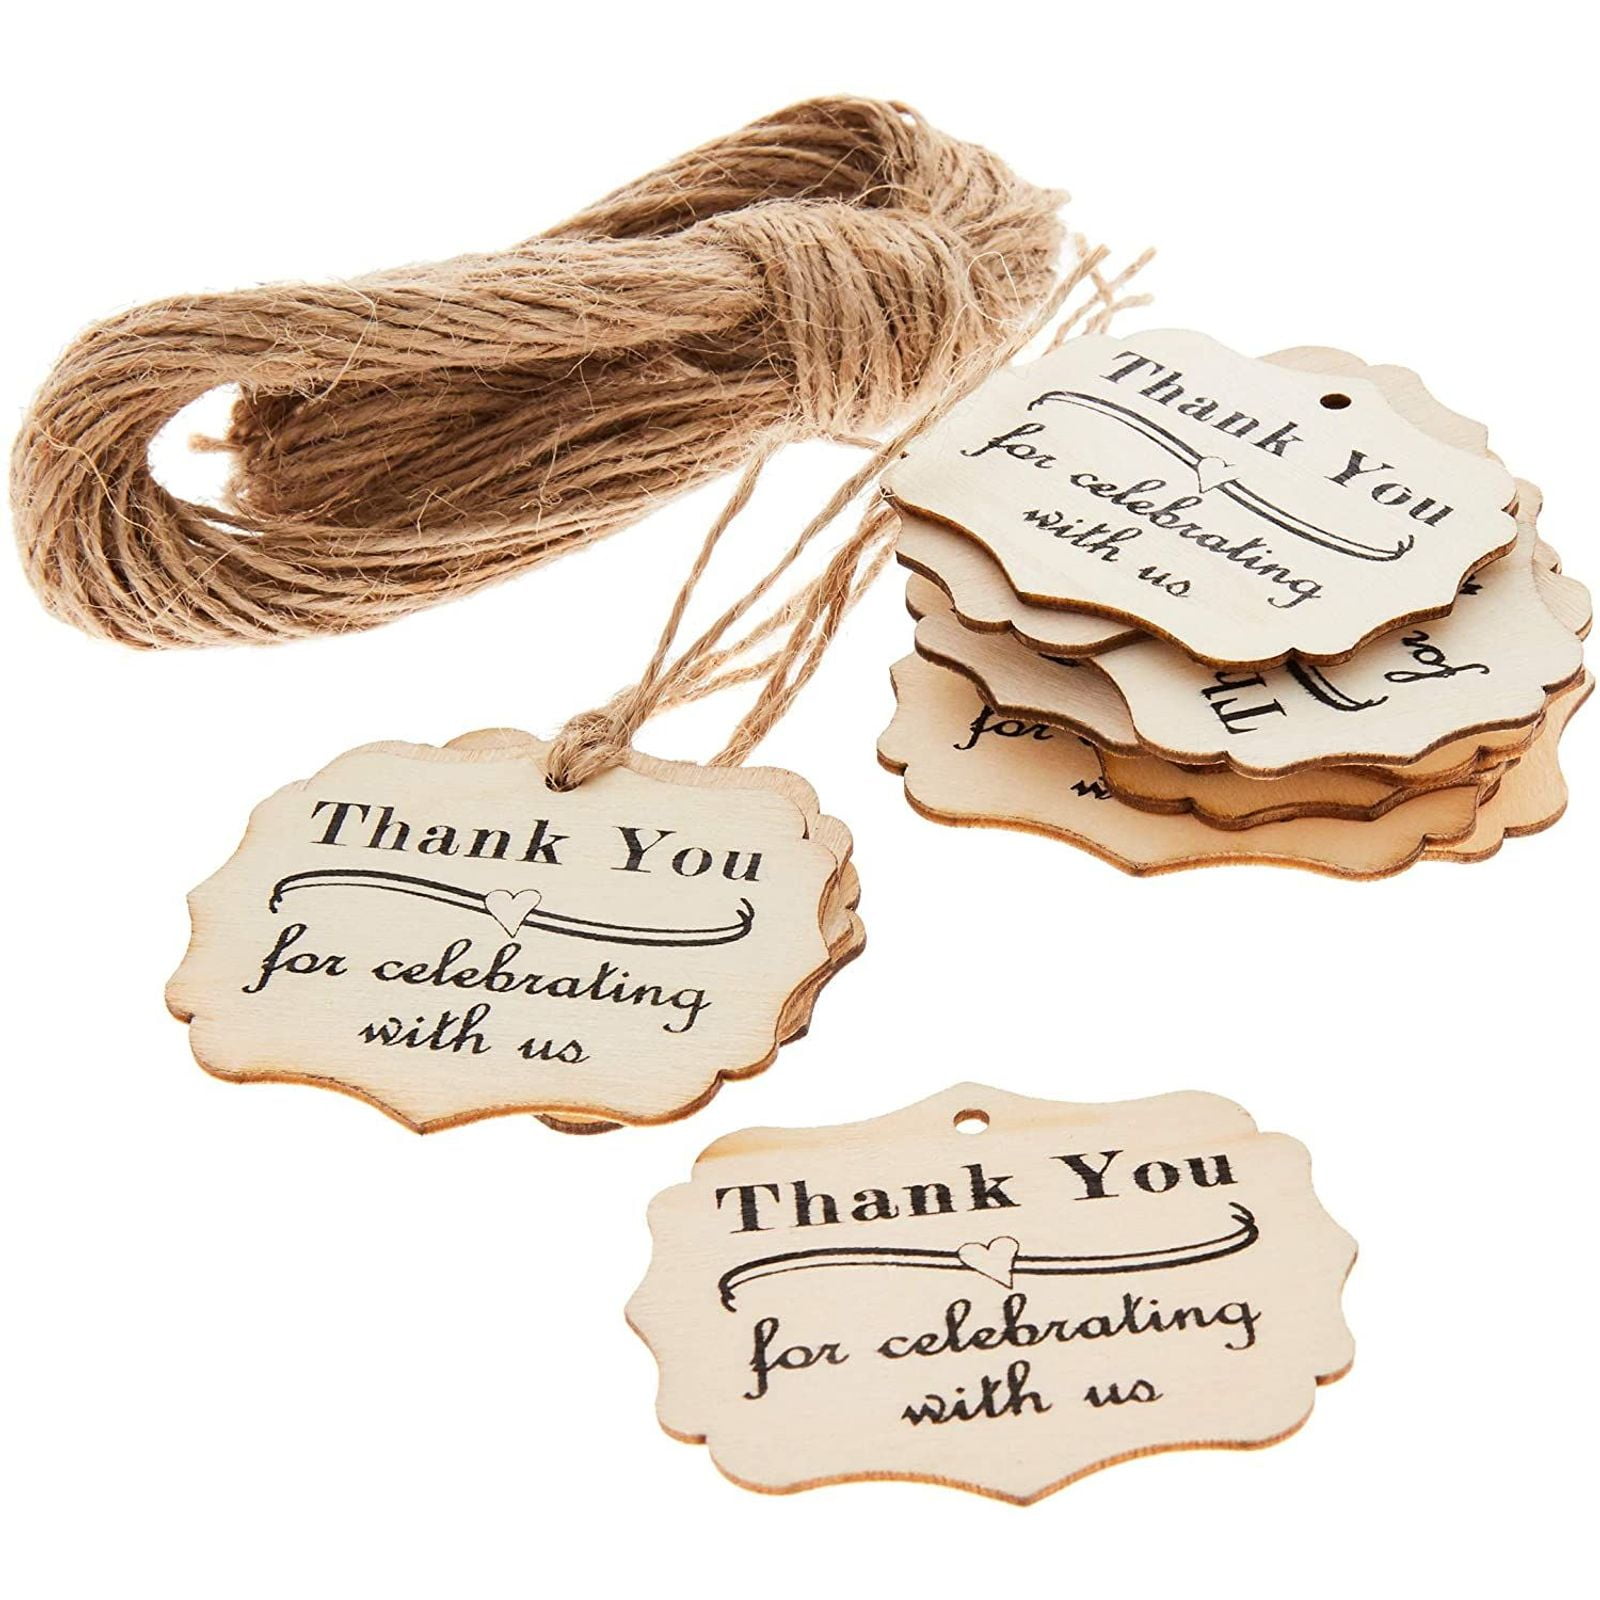 100 PCS Thank You Paper Tags Craft Gift Hang Wedding Party Deco Favors For Guest 